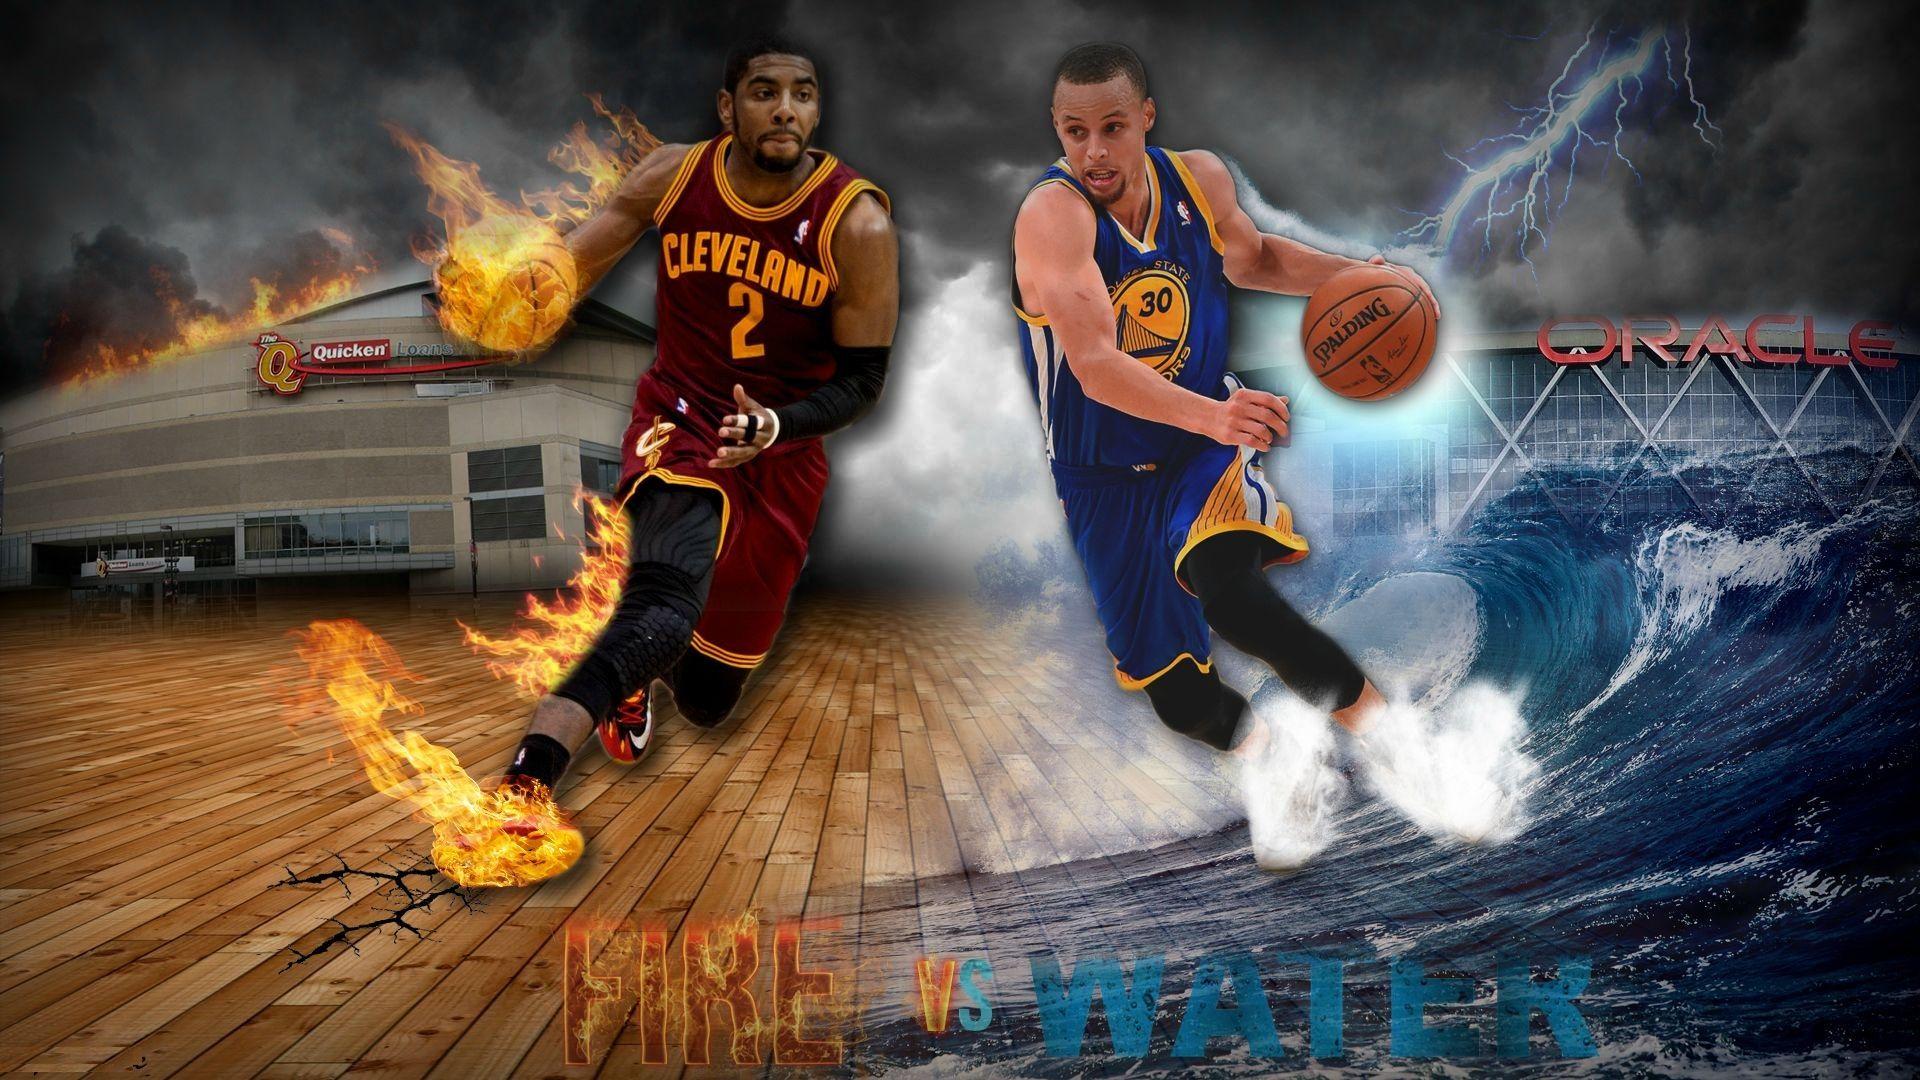 Stephen Curry And Kyrie Irving Wallpaper Irving's